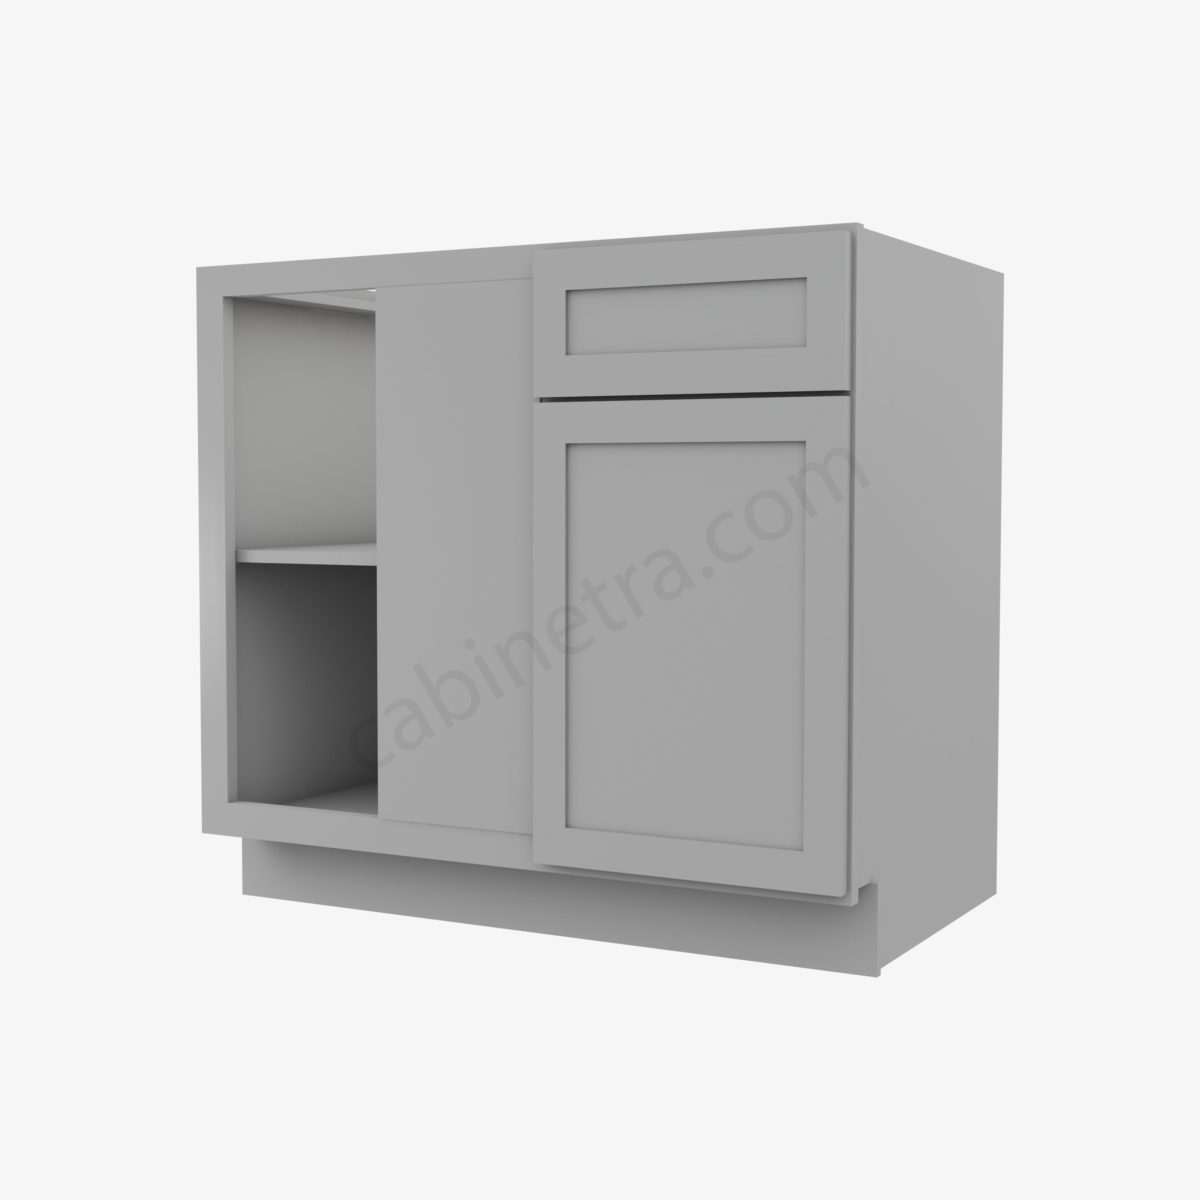 AB BBLC39 42 36W 0 Forevermark Lait Gray Shaker Cabinetra scaled